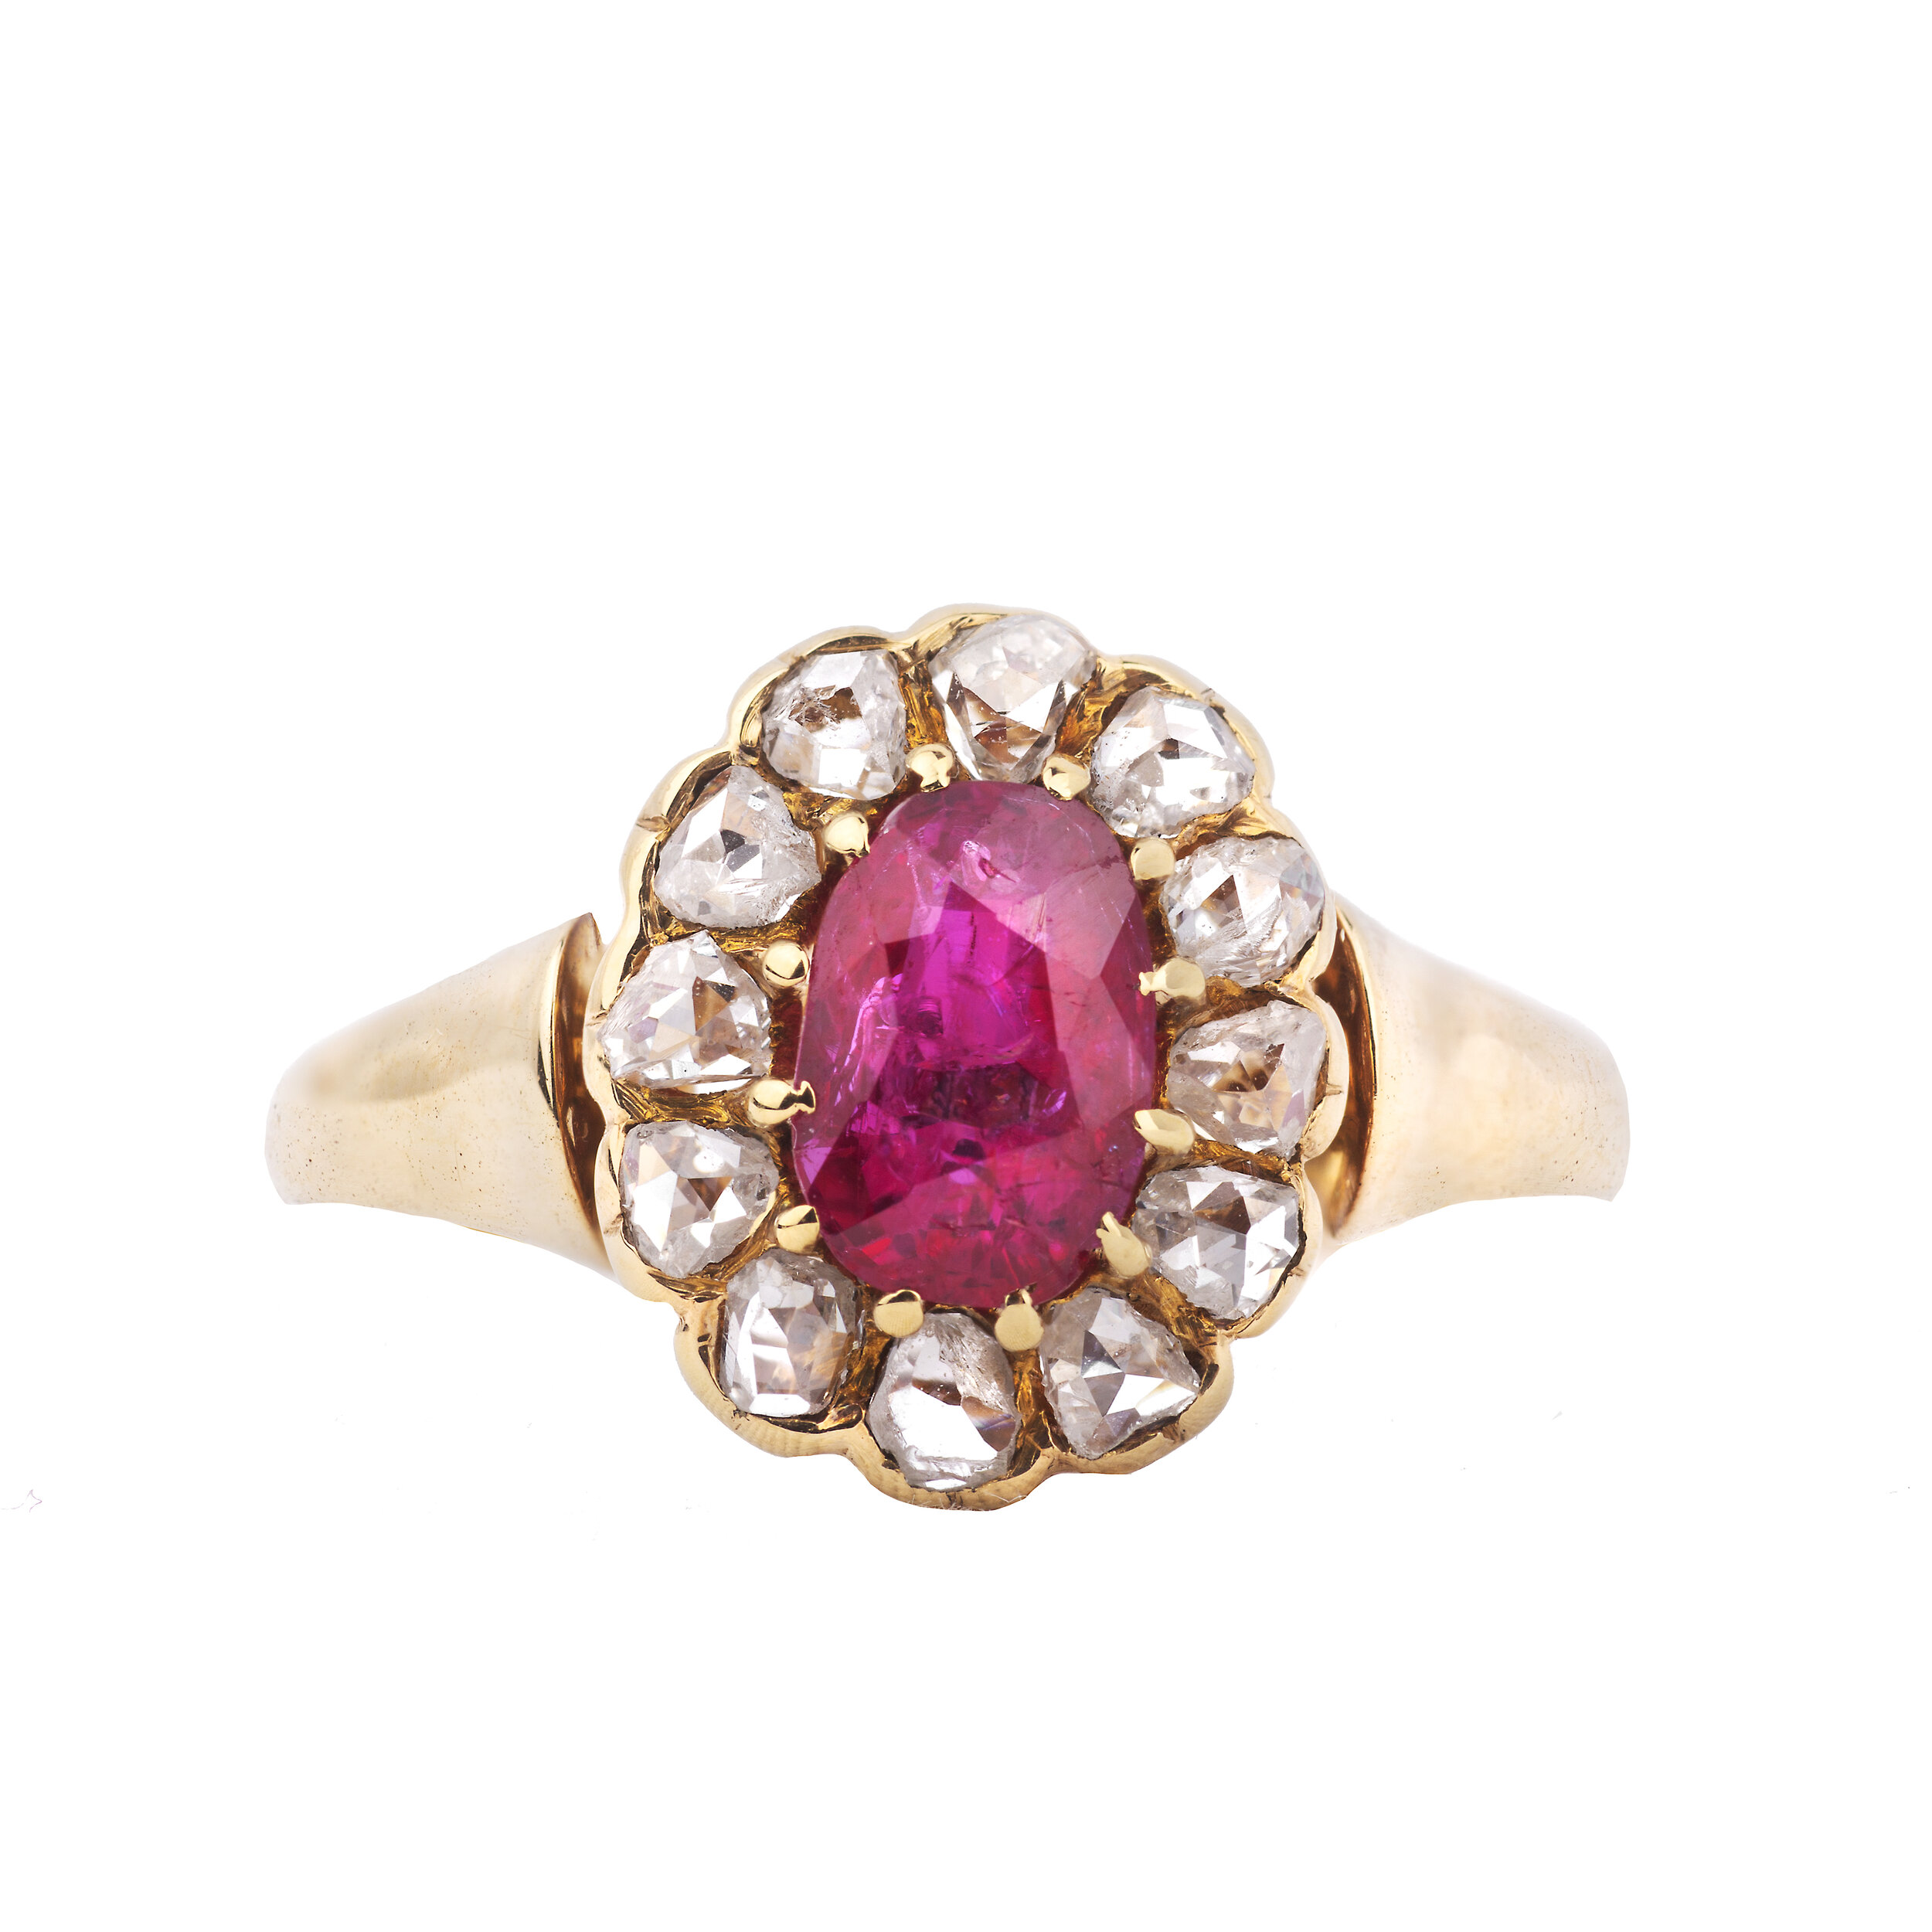 18ct Gold, Diamond and Ruby Cluster Ring Circa 1910